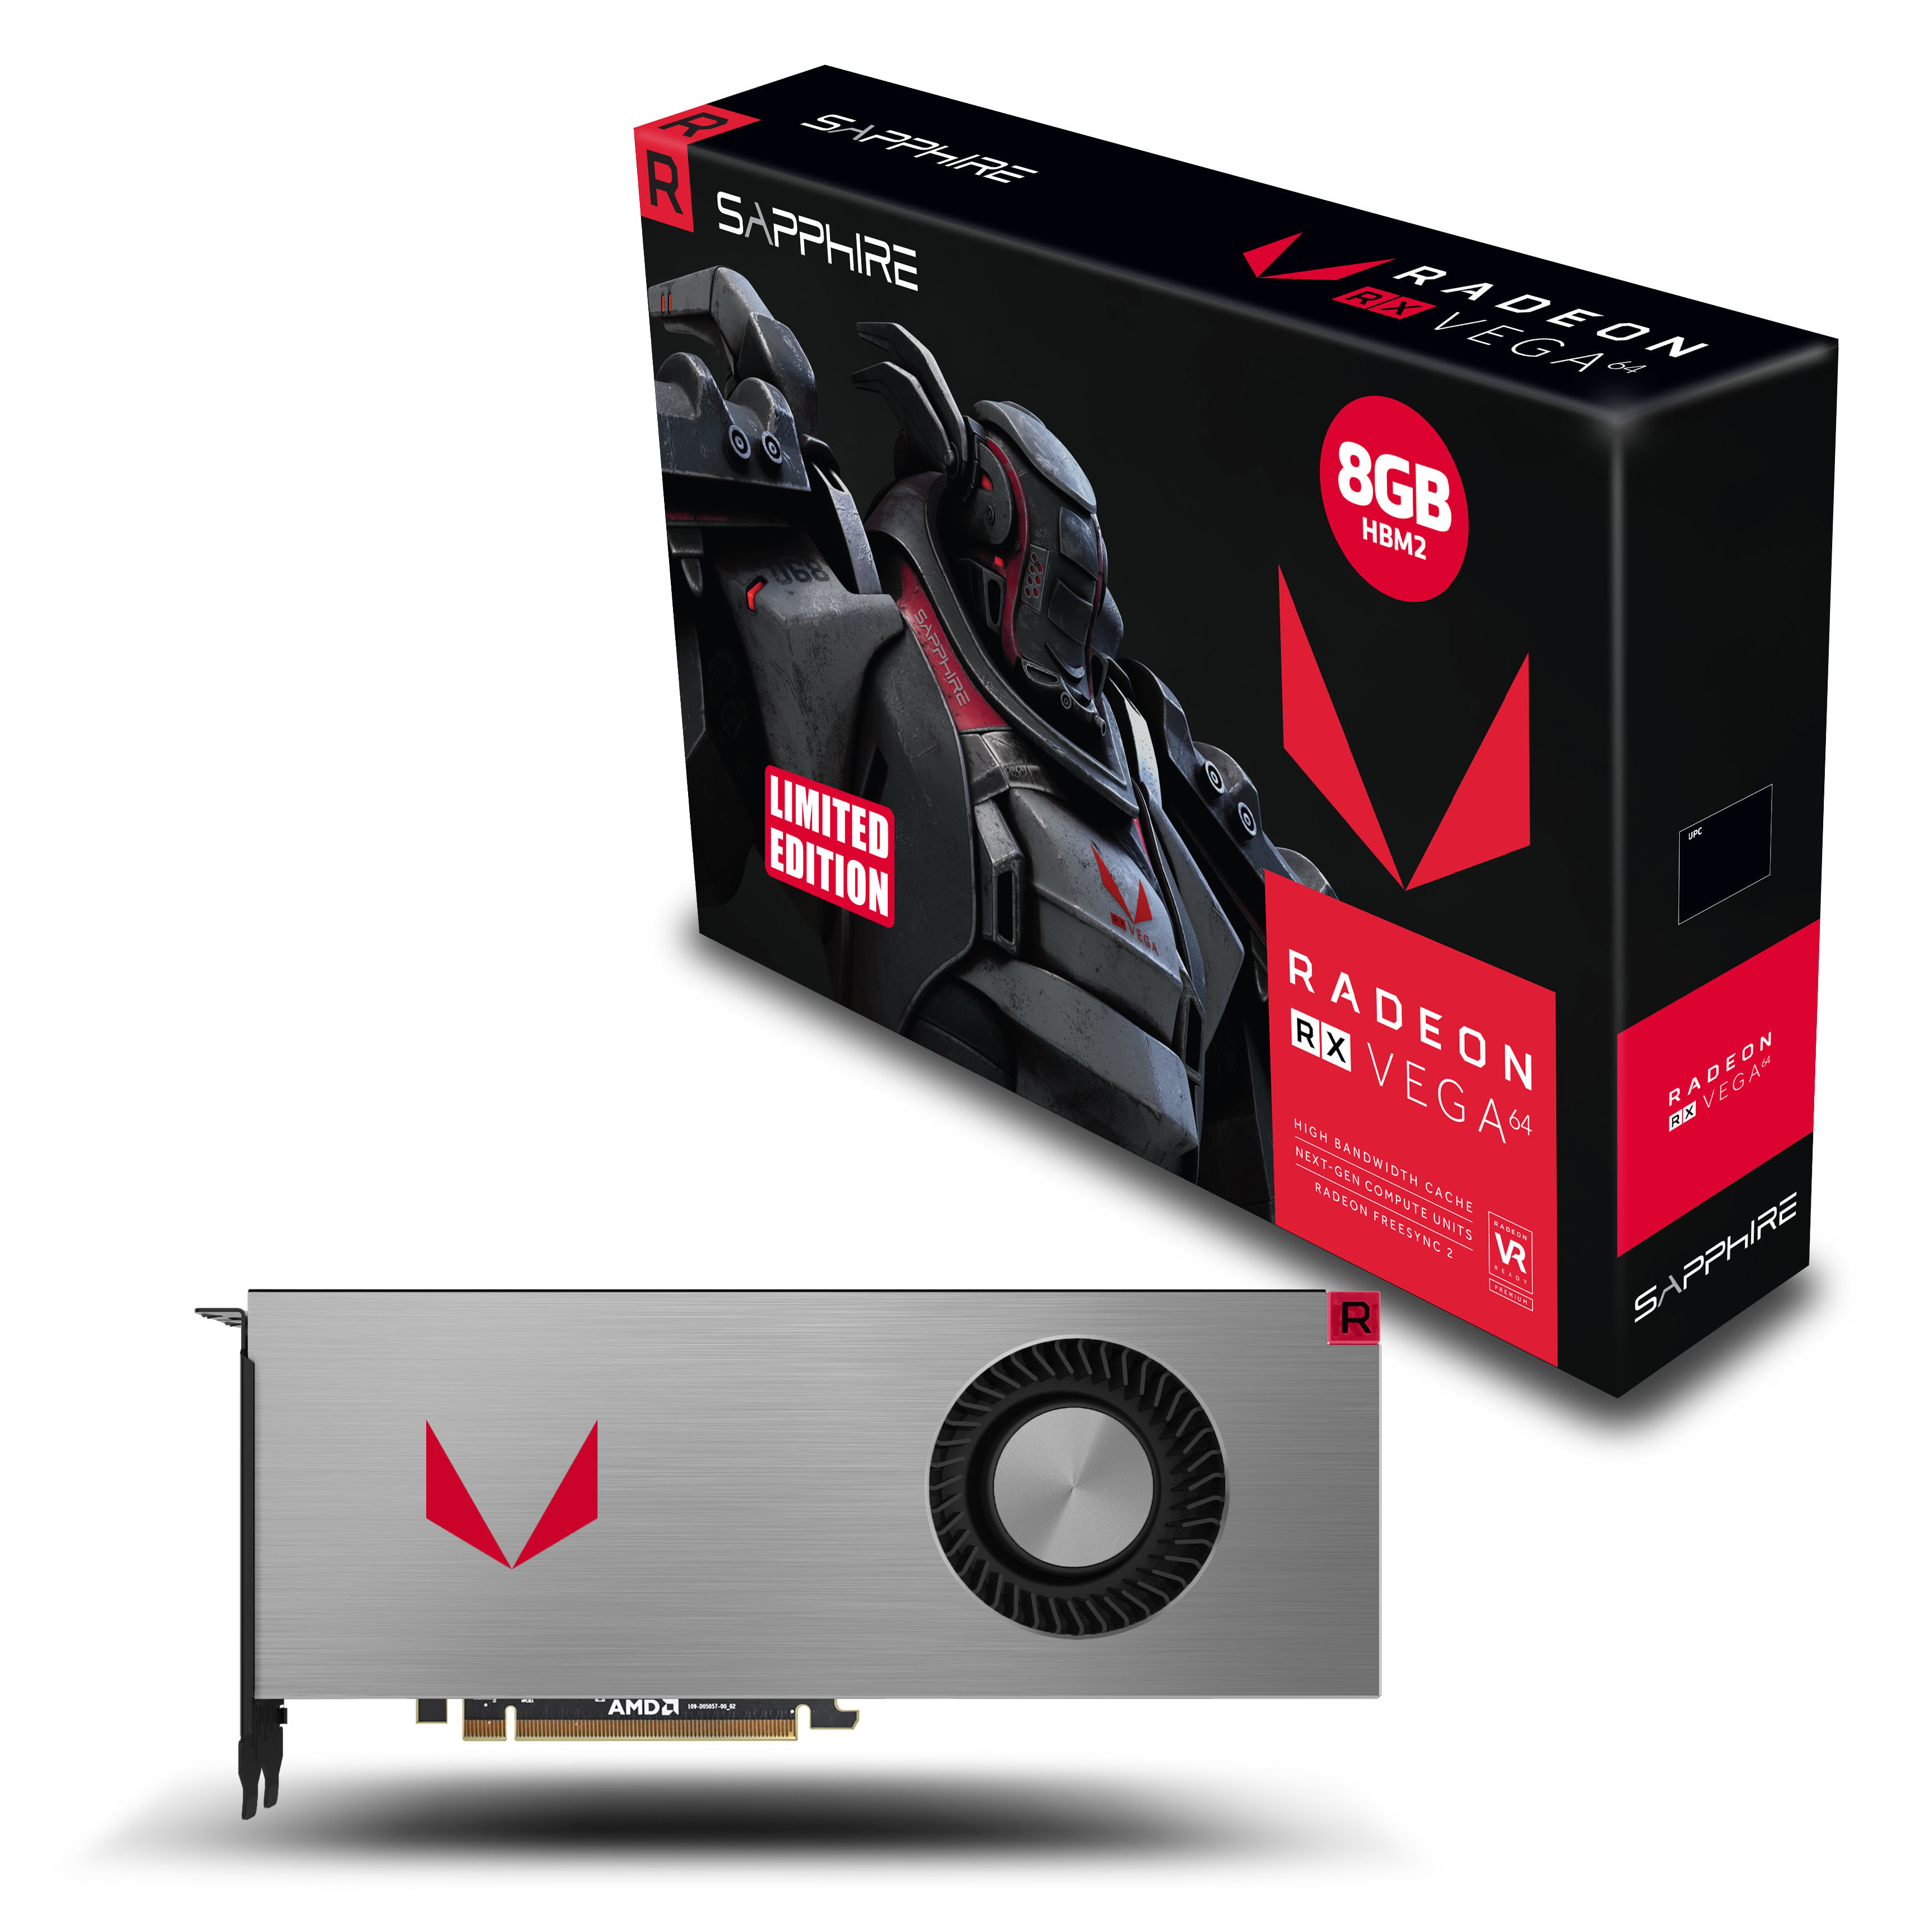 Media asset in full size related to 3dfxzone.it news item entitled as follows: EA annuncia C & C: Red Alert 3 su PC, Playstation 3 e Xbox 360 | Image Name: new26834_SAPPHIRE-Radeon-RX-Vega-64-8GB-HBM2_5.jpg